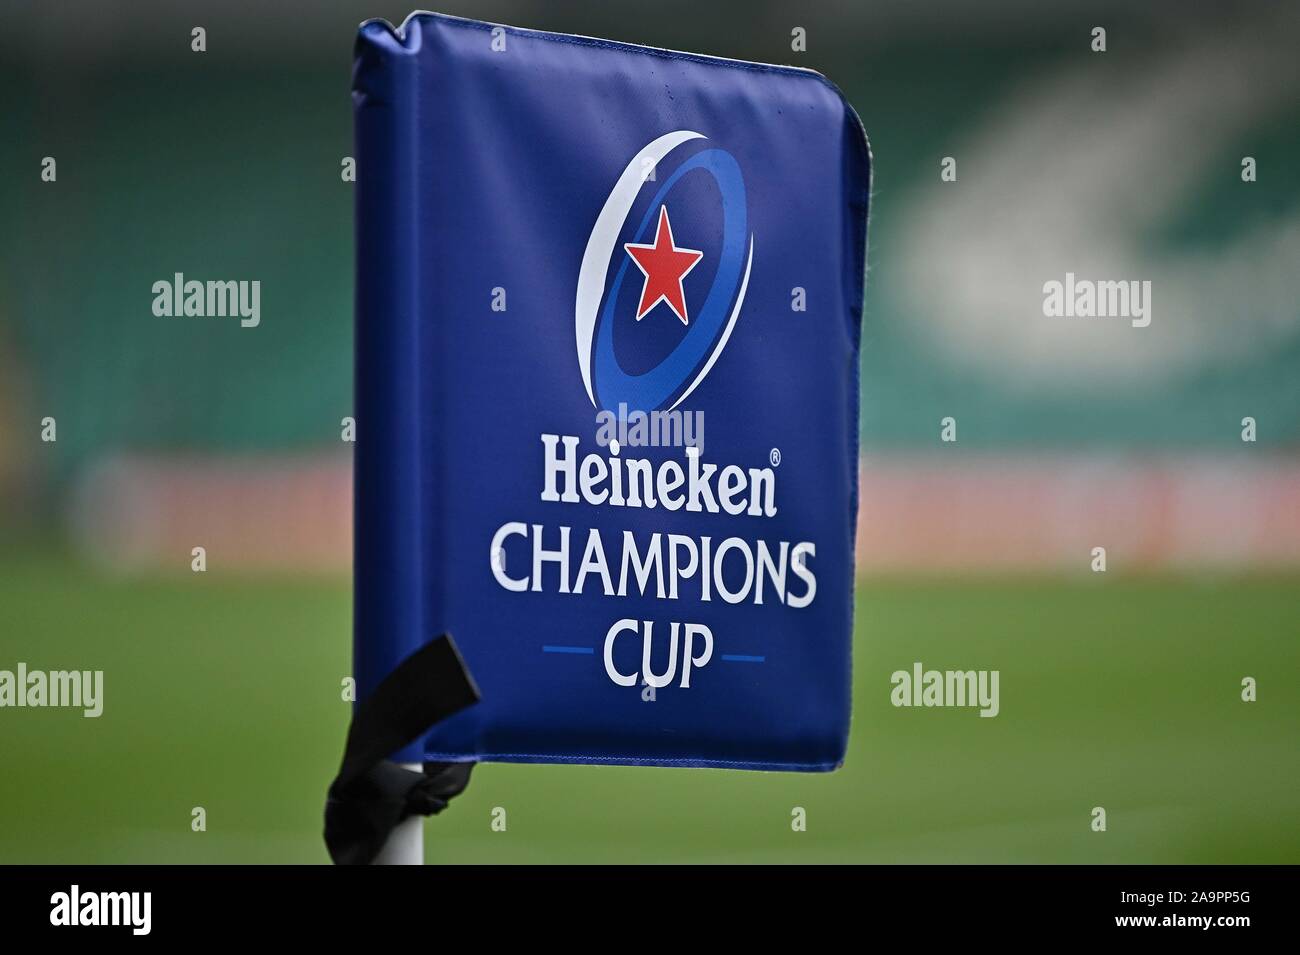 Heineken Champions Cup High Resolution Stock Photography And Images Alamy